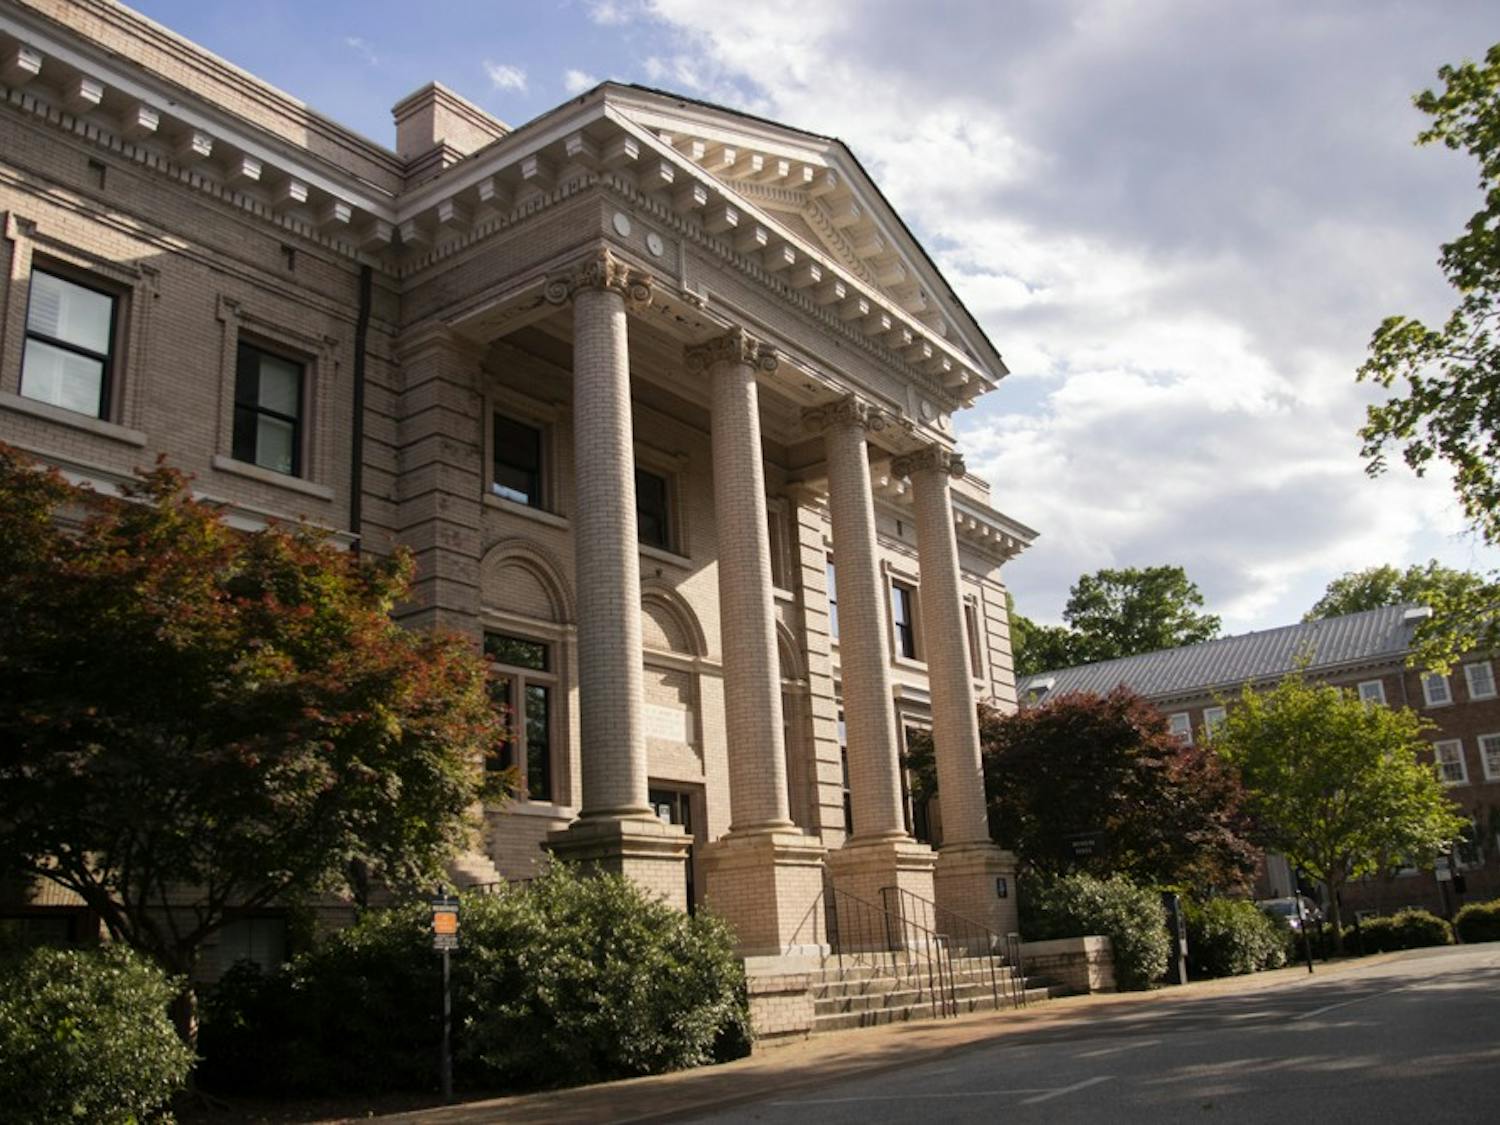 Bynum Hall pictured on April 22, 2021. Elizabeth Mayer-Davis was named the new dean of The Graduate School at UNC on Friday, July 22, 2022.